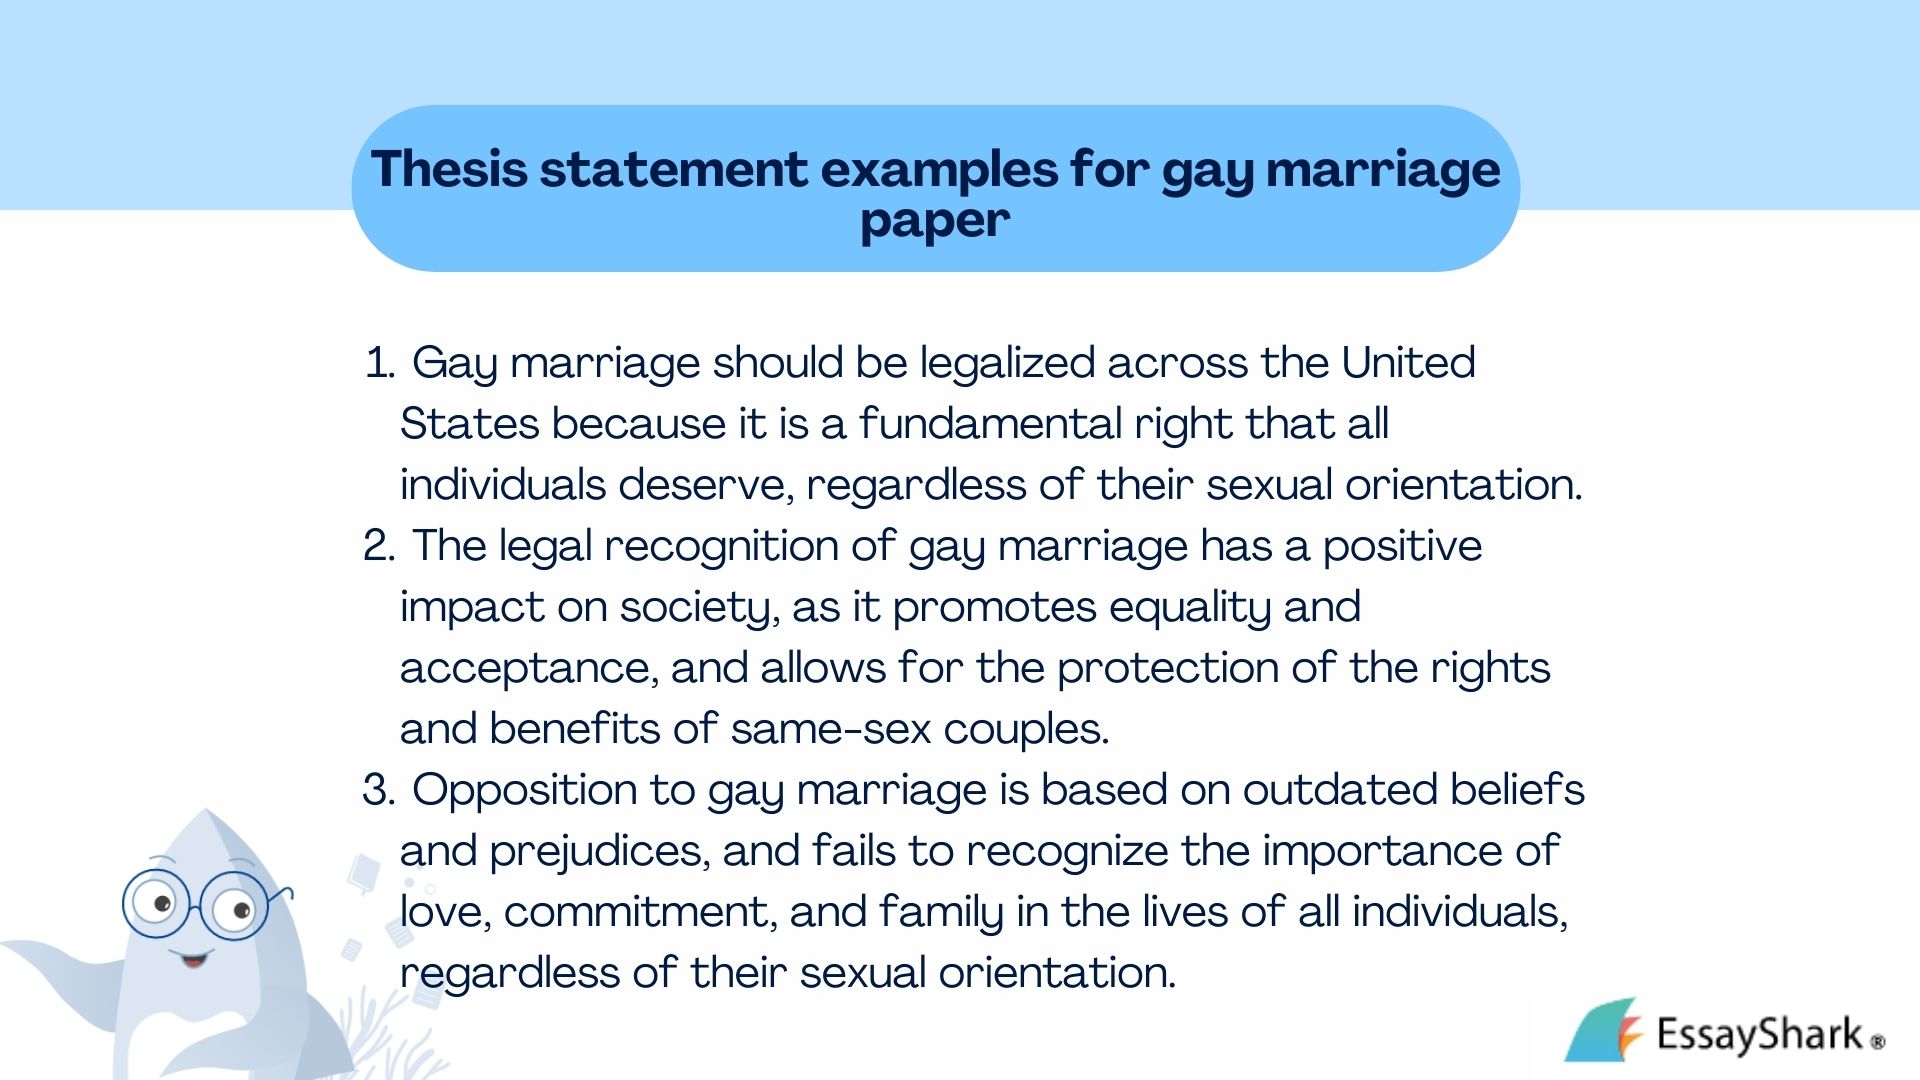 Thesis statement examples for gay marriage paper